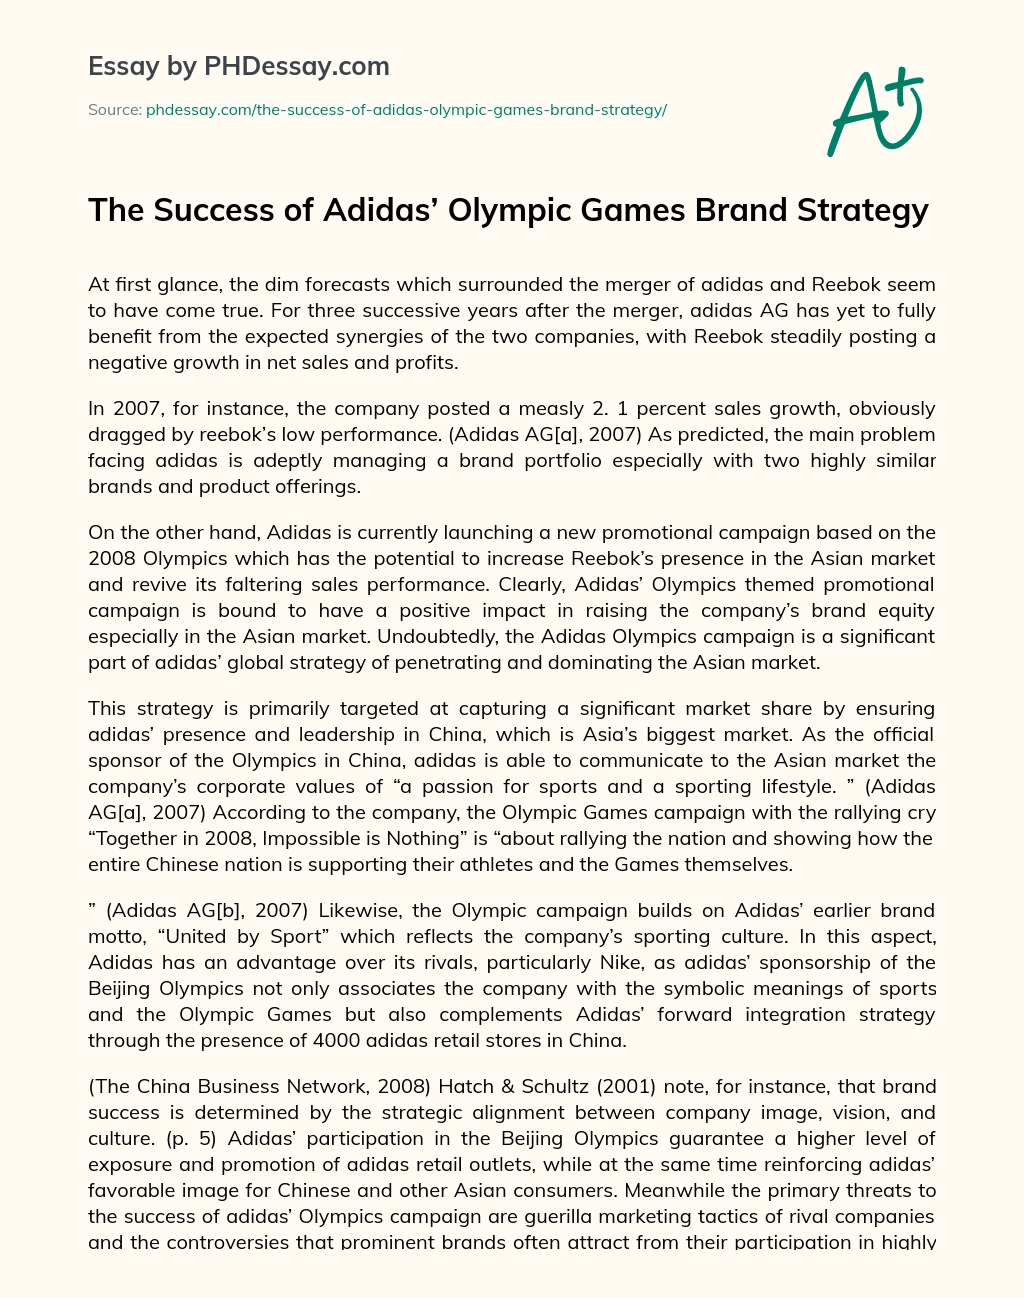 The Success of Adidas’ Olympic Games Brand Strategy essay